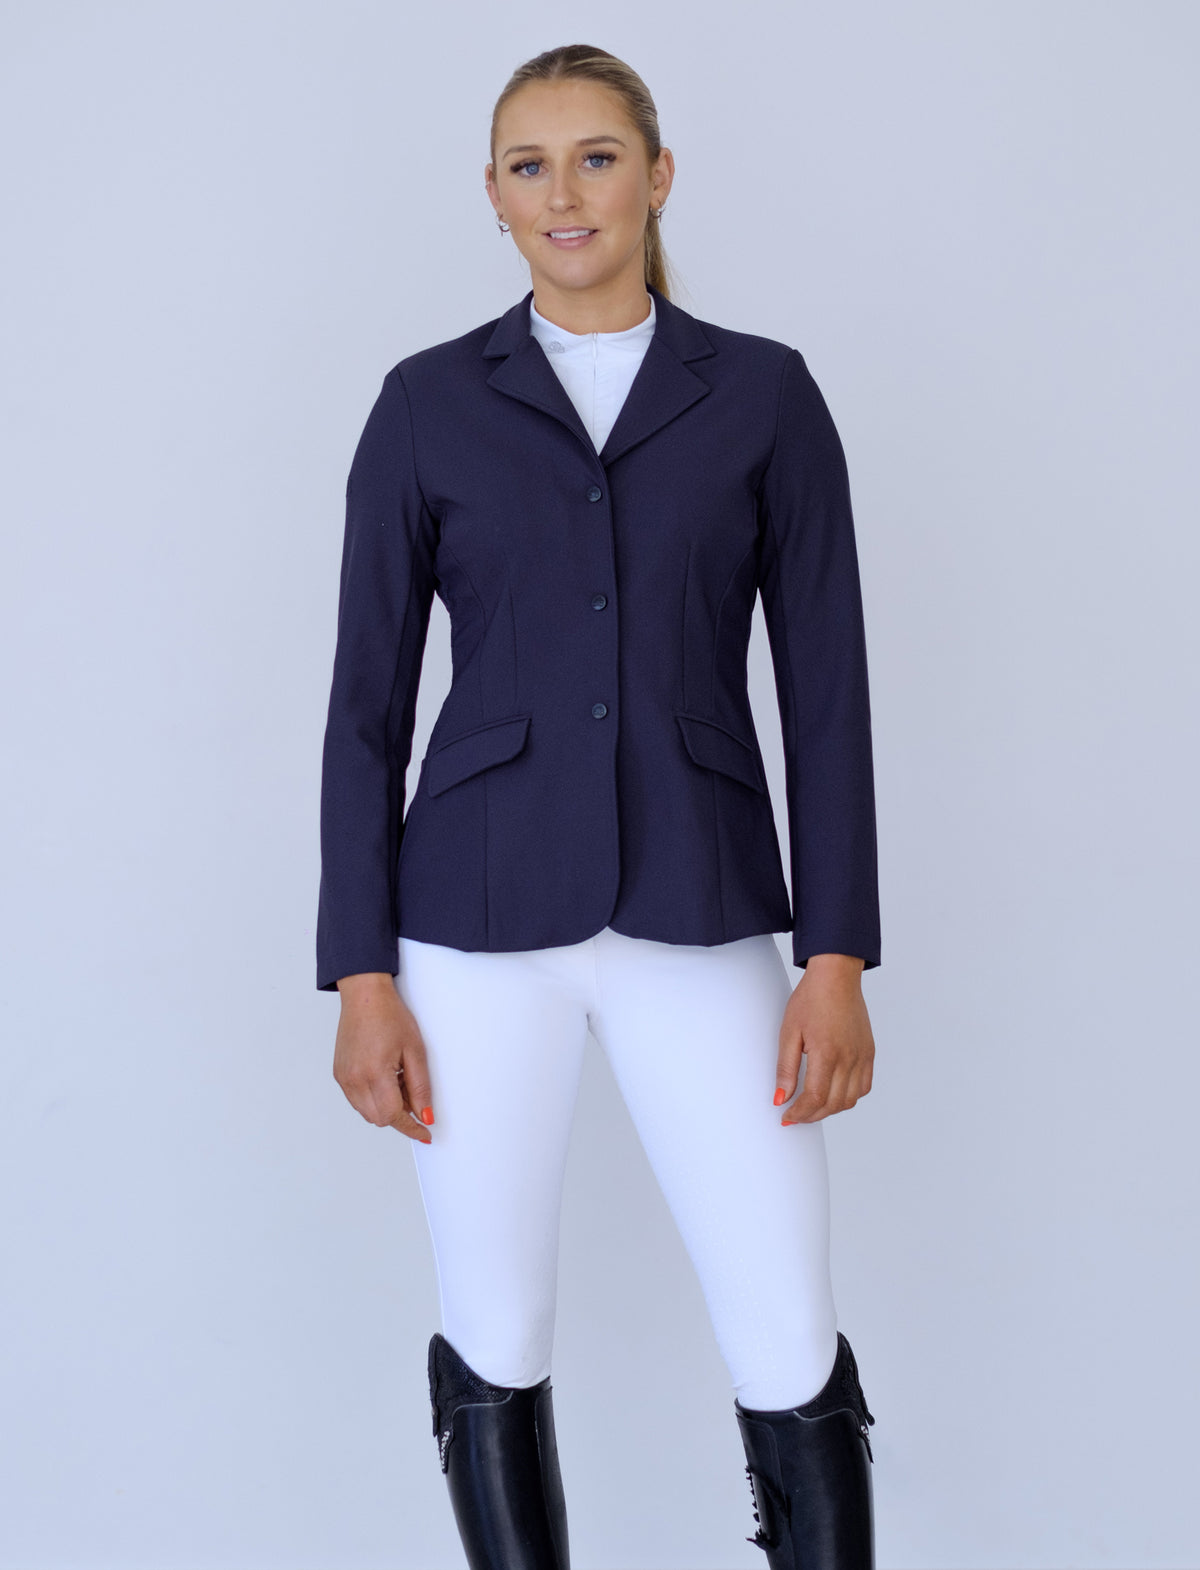 NAVY PERFORMANCE COMPETITION JACKET